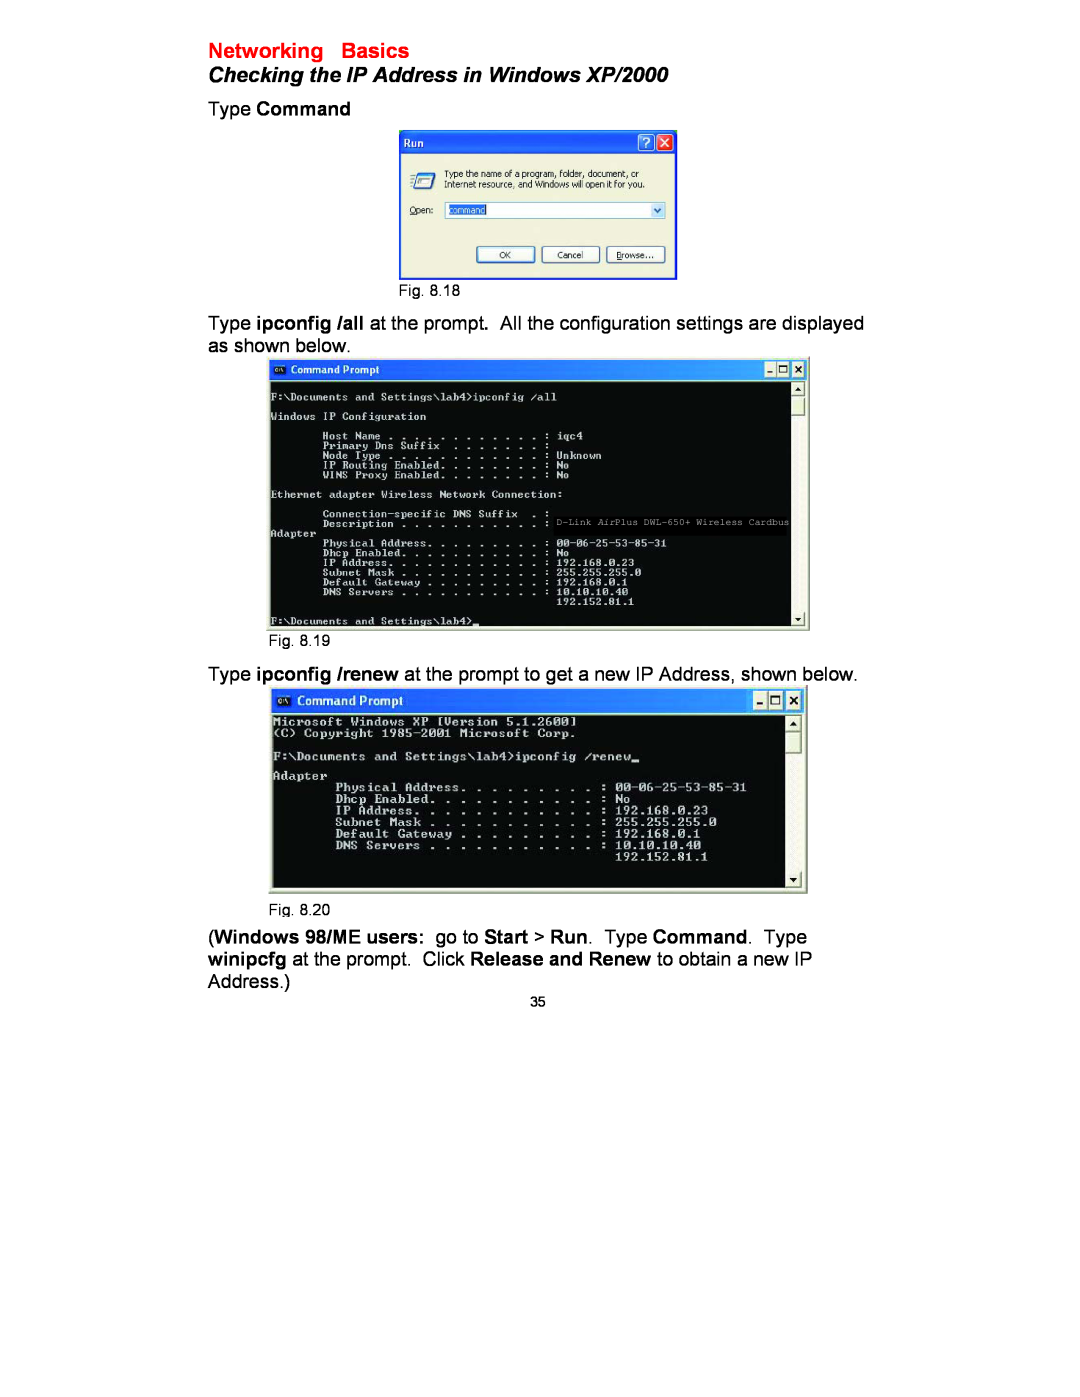 D-Link DWL-650 manual Checking the IP Address in Windows XP/2000, Type Command, Networking Basics 